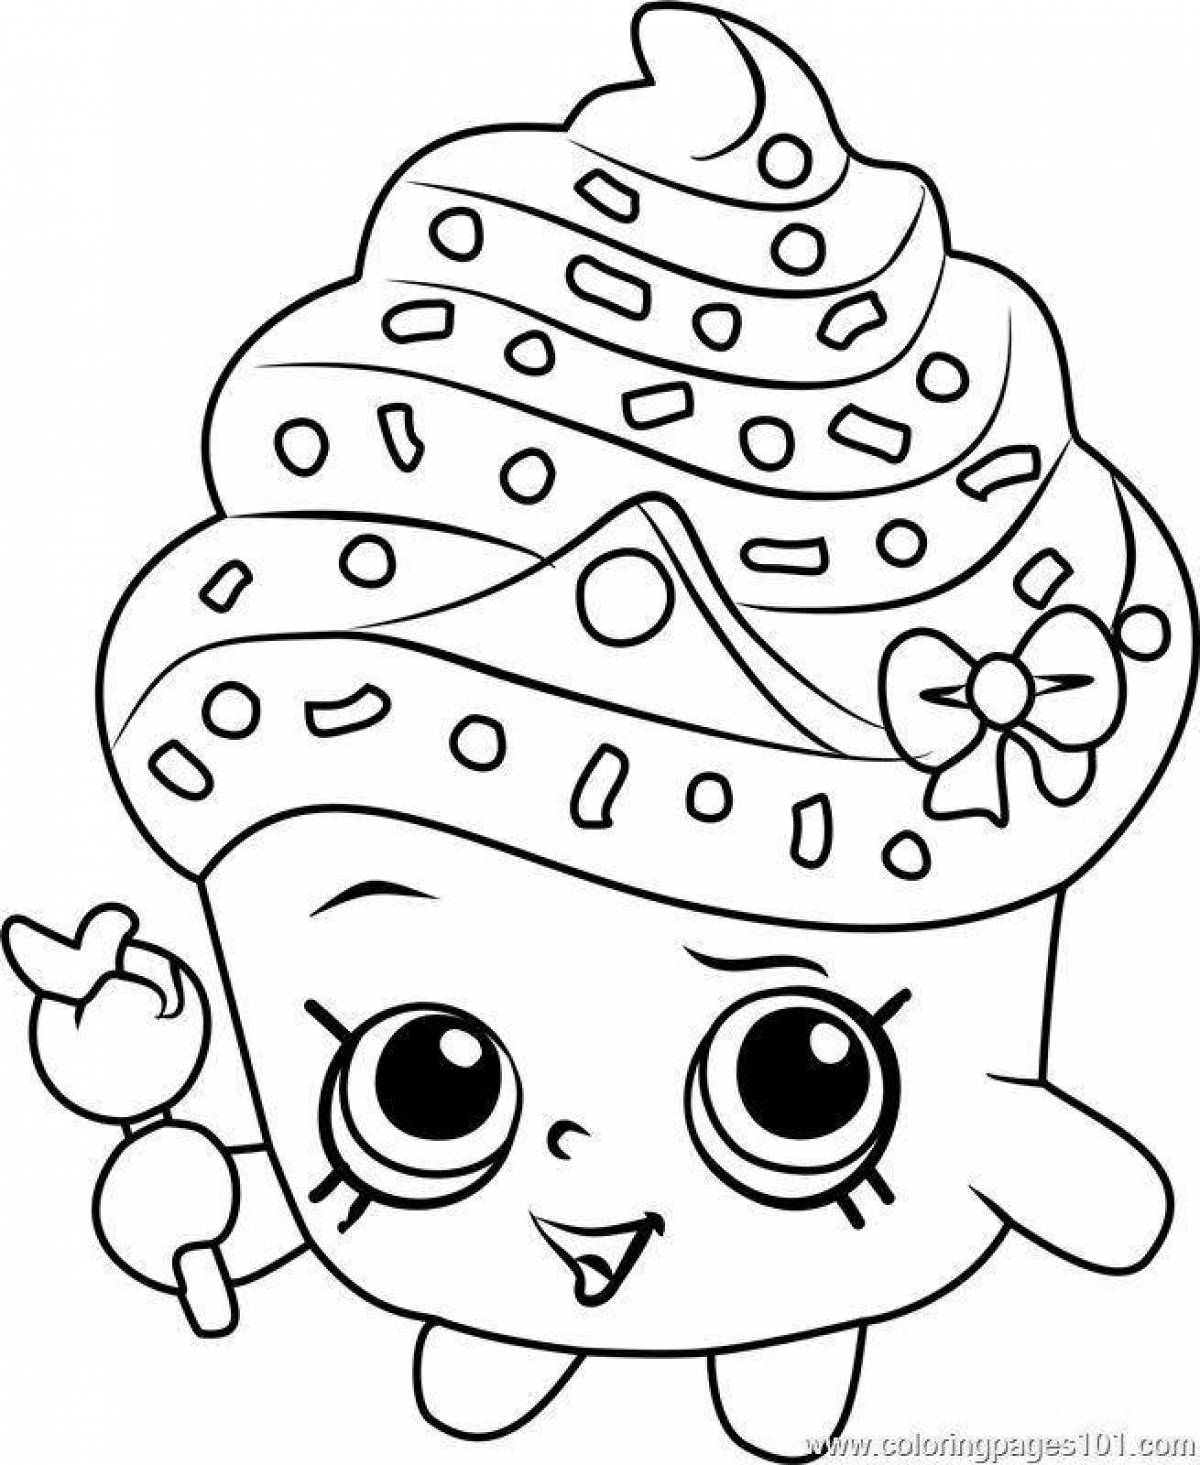 Glorious 3 markers coloring page